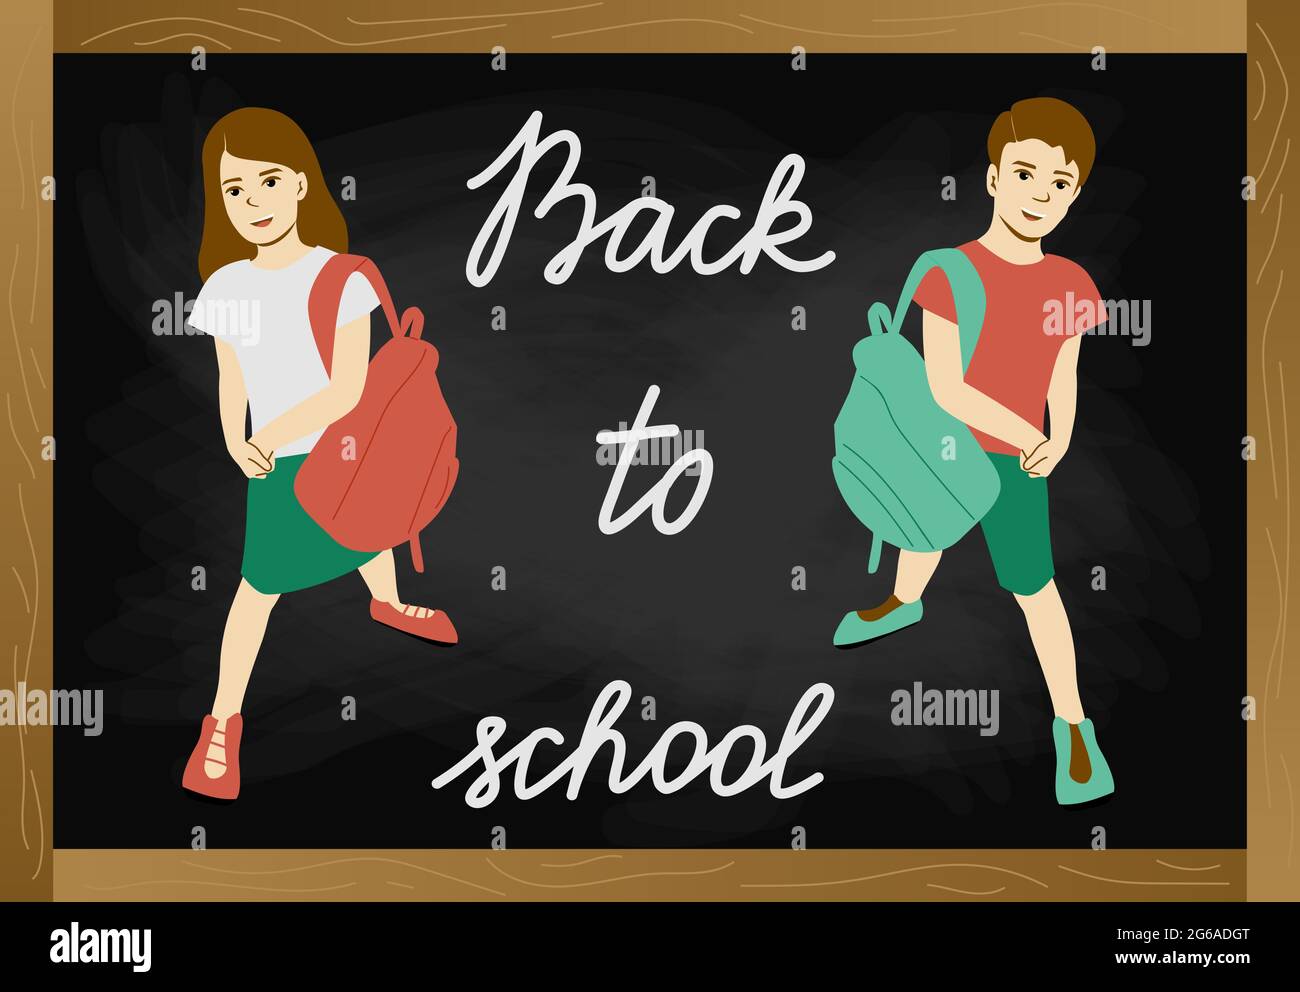 Back to school chalkboard with text, two schoolchildren girl and boy with schoolbags on blackboard background vector illustration. Stock Vector